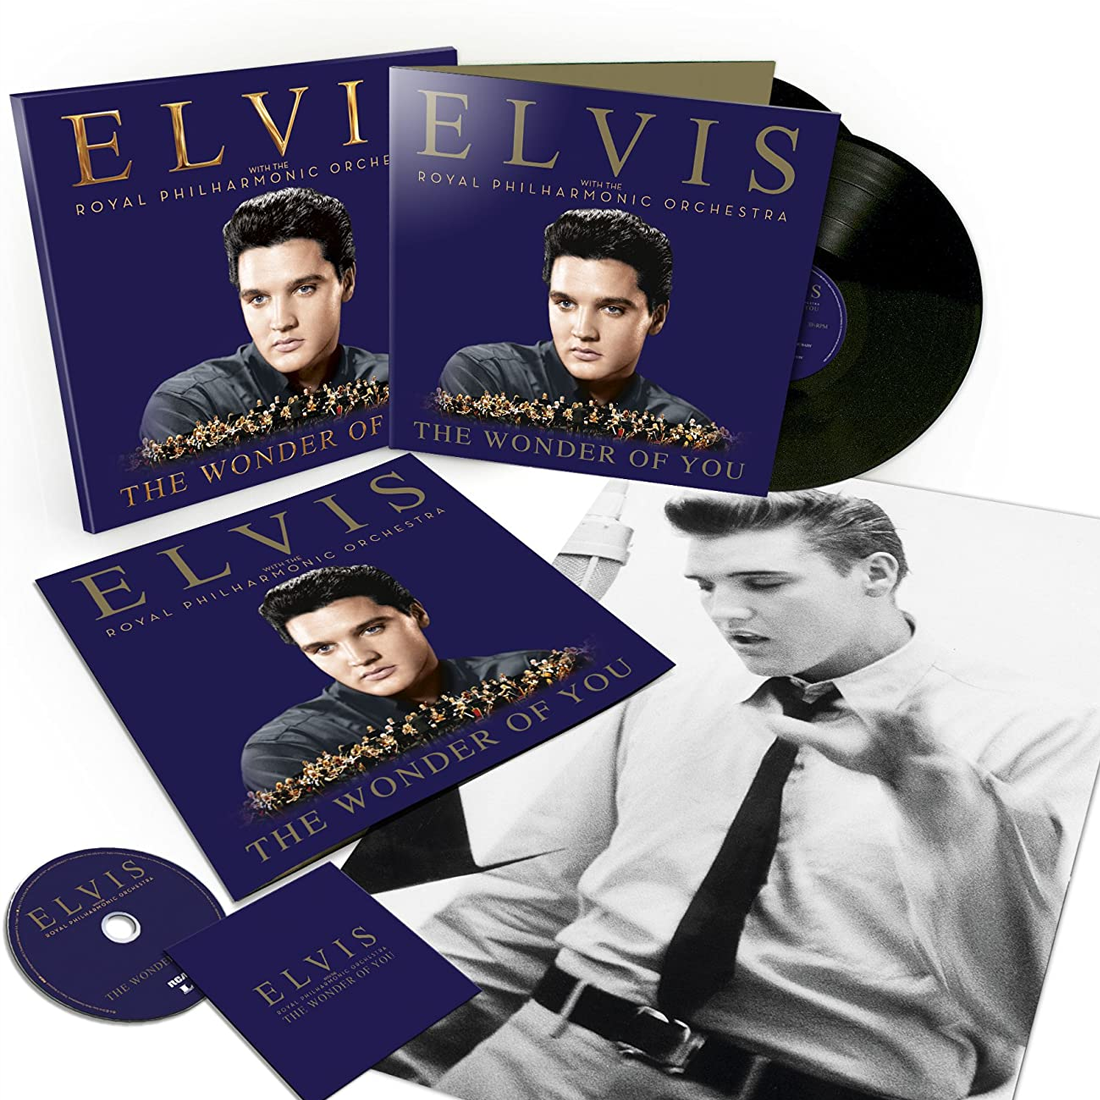 The Wonder of You: Elvis Presley with The Royal Philharmonic Orchestra (Deluxe Edition): Vinyl 2LP + CD